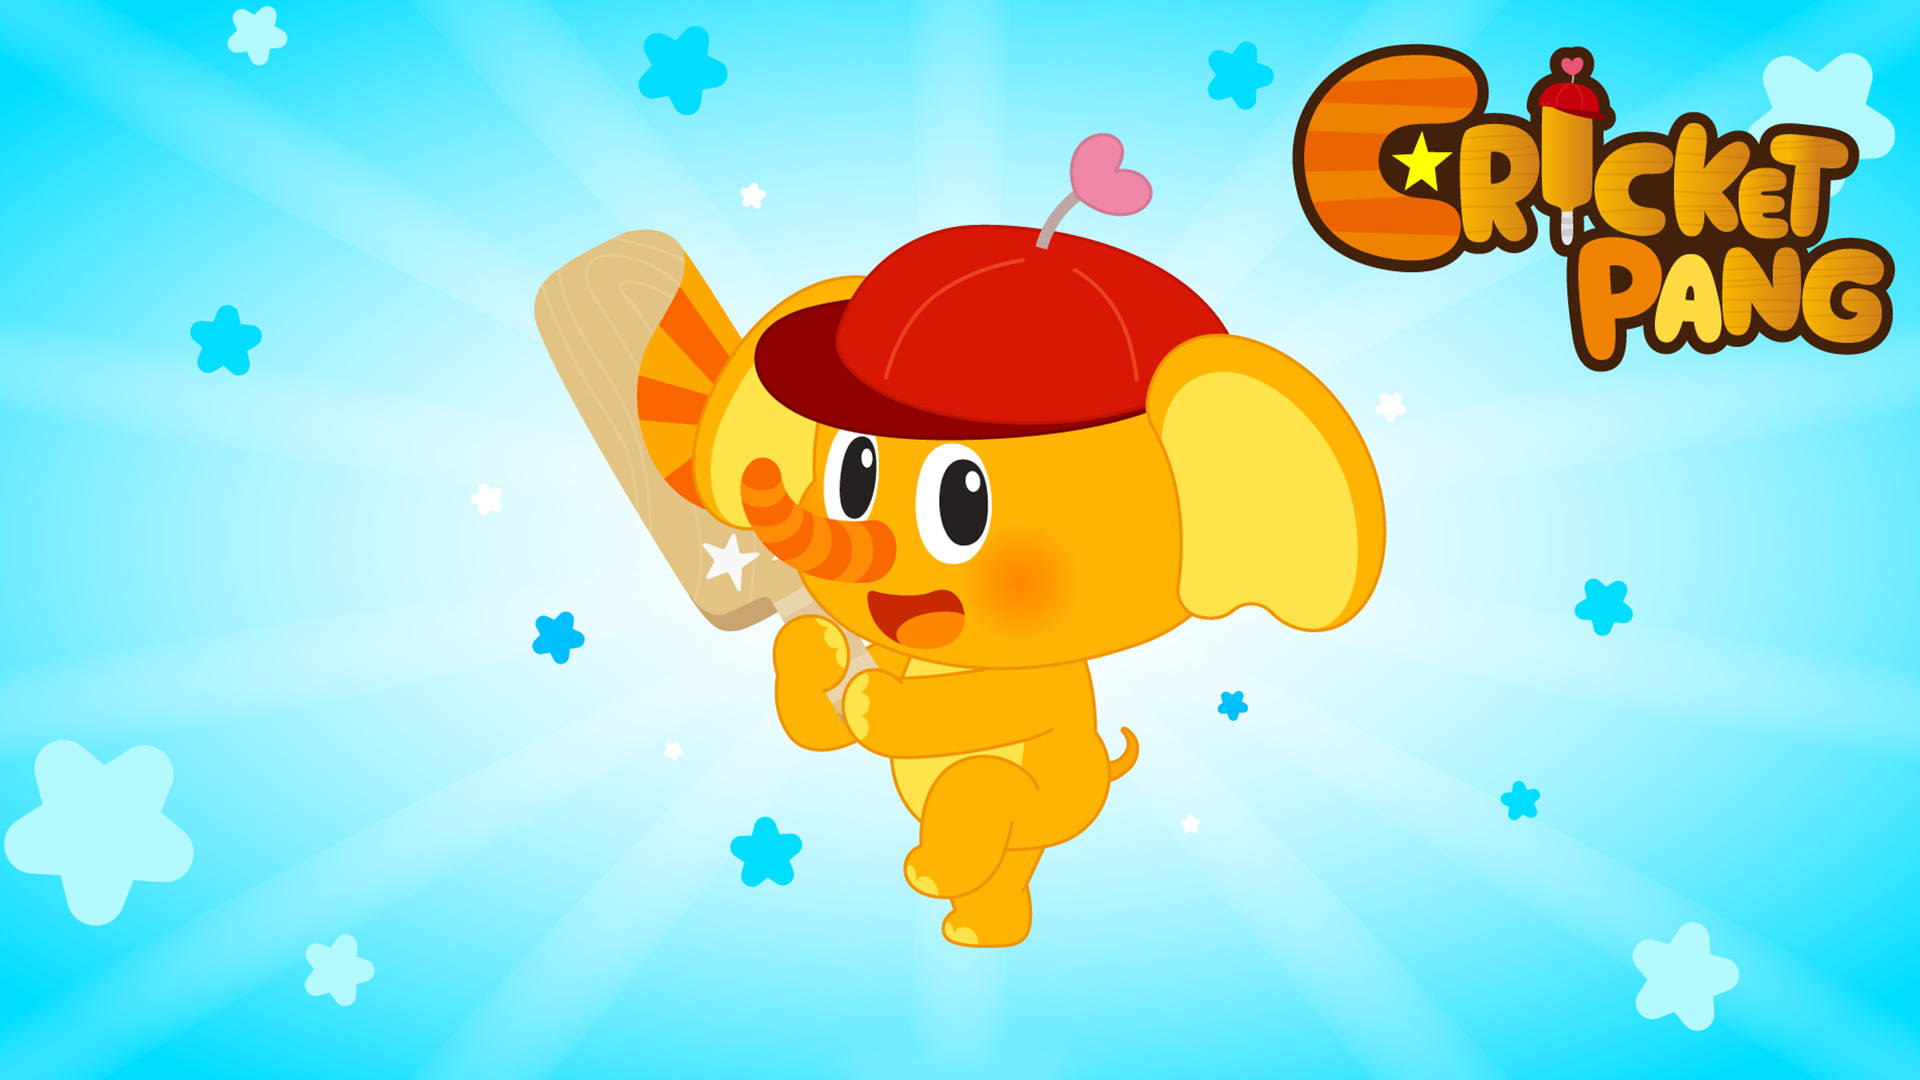 STARZPLAY Partners With YouNeedCharacter To Expands Kids’ Entertainment Portfolio With CricketPang Animation Series